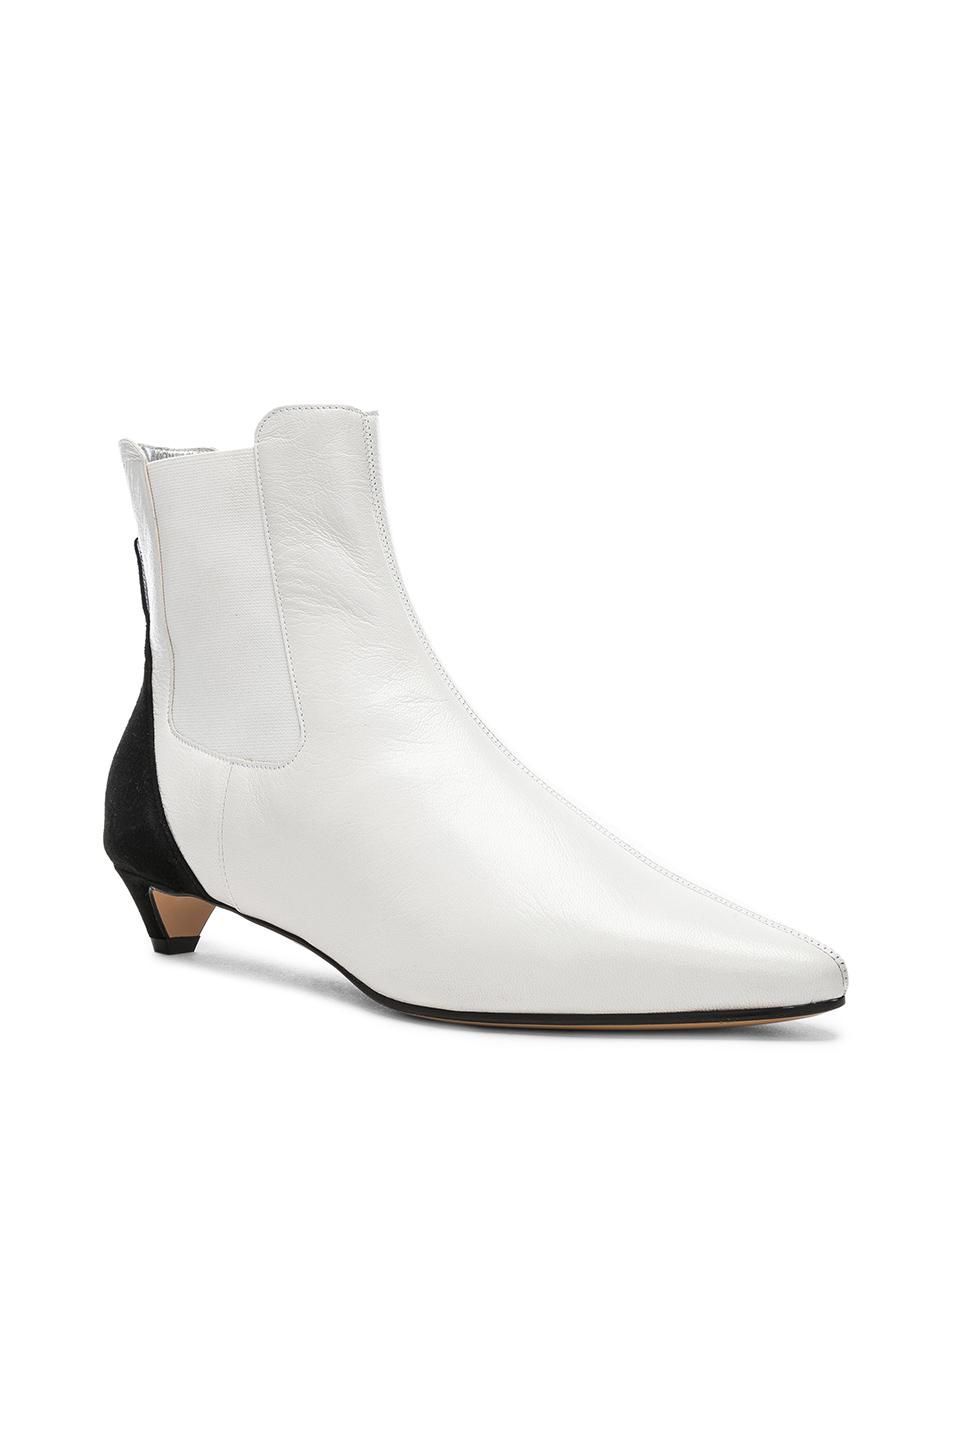 Gv3 Two Tone Chelsea Boots 